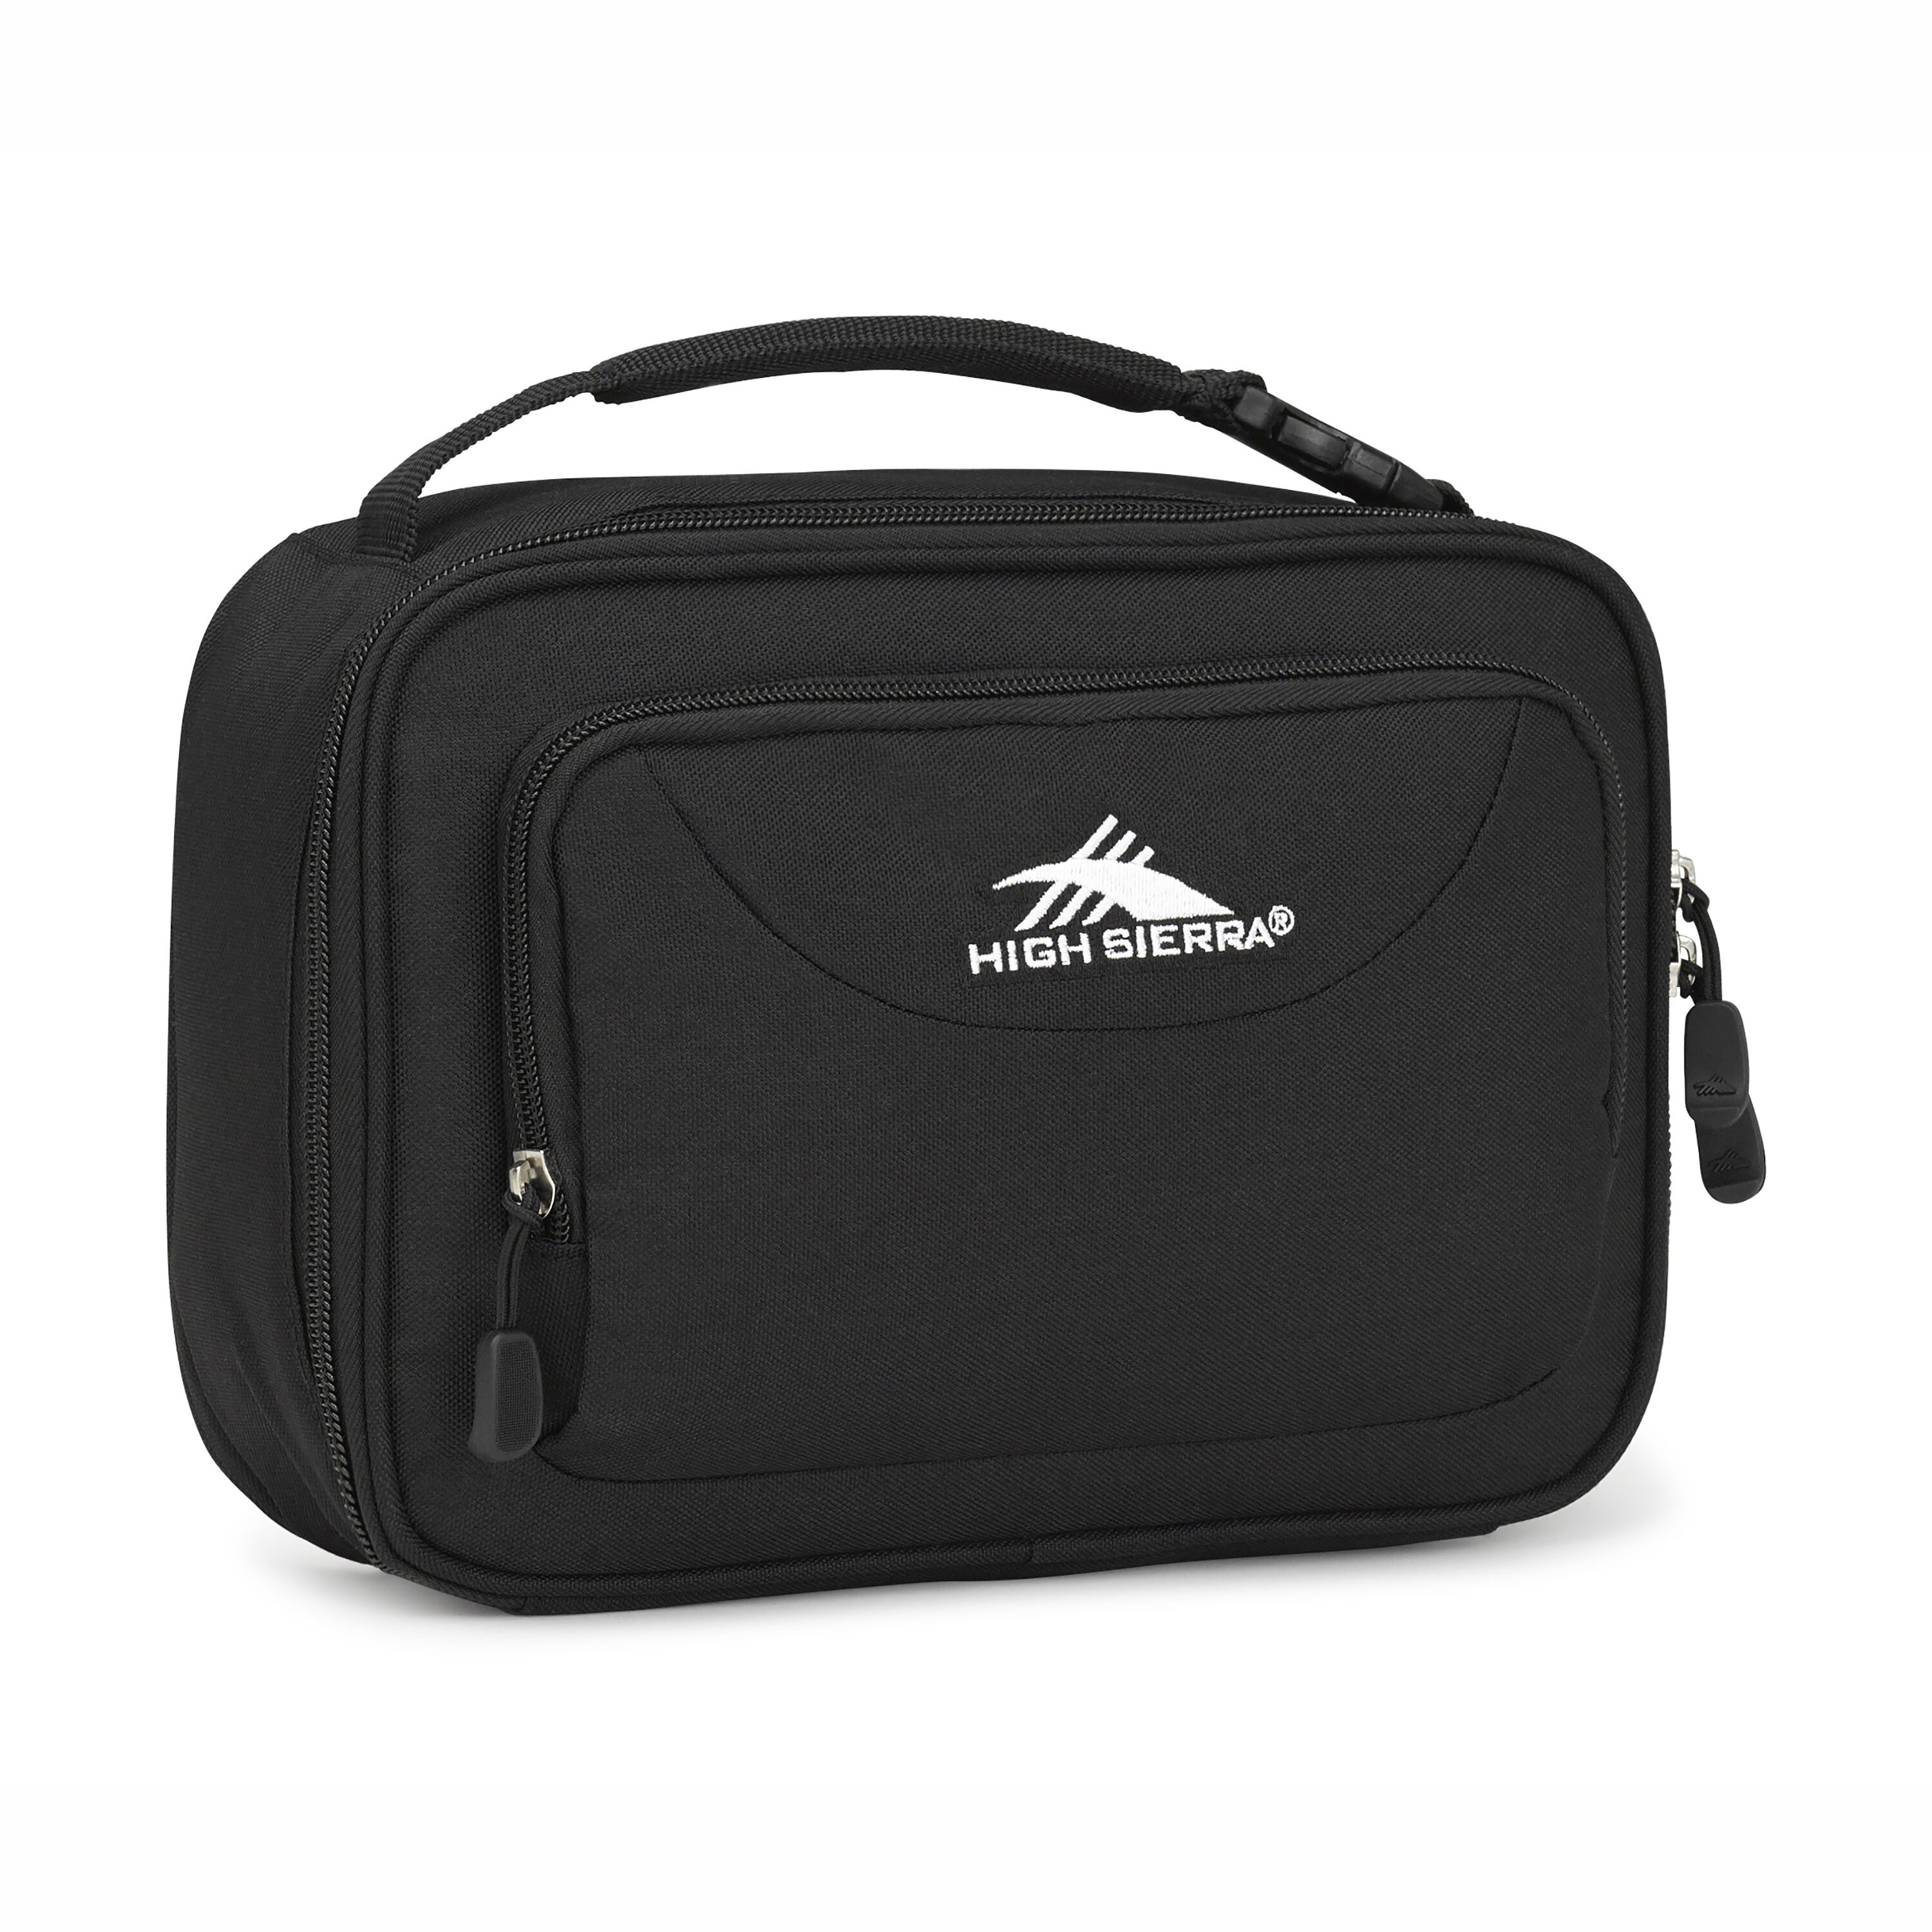 https://www.samsonite.ca/dw/image/v2/BBZB_PRD/on/demandware.static/-/Sites-product-catalog/default/dw1154c114/collections/_highsierra/LunchBags/500x500/747151041_SINGLECOMPARTMENT_FRONT_ANGLE.jpg?sw=3000&sh=3000